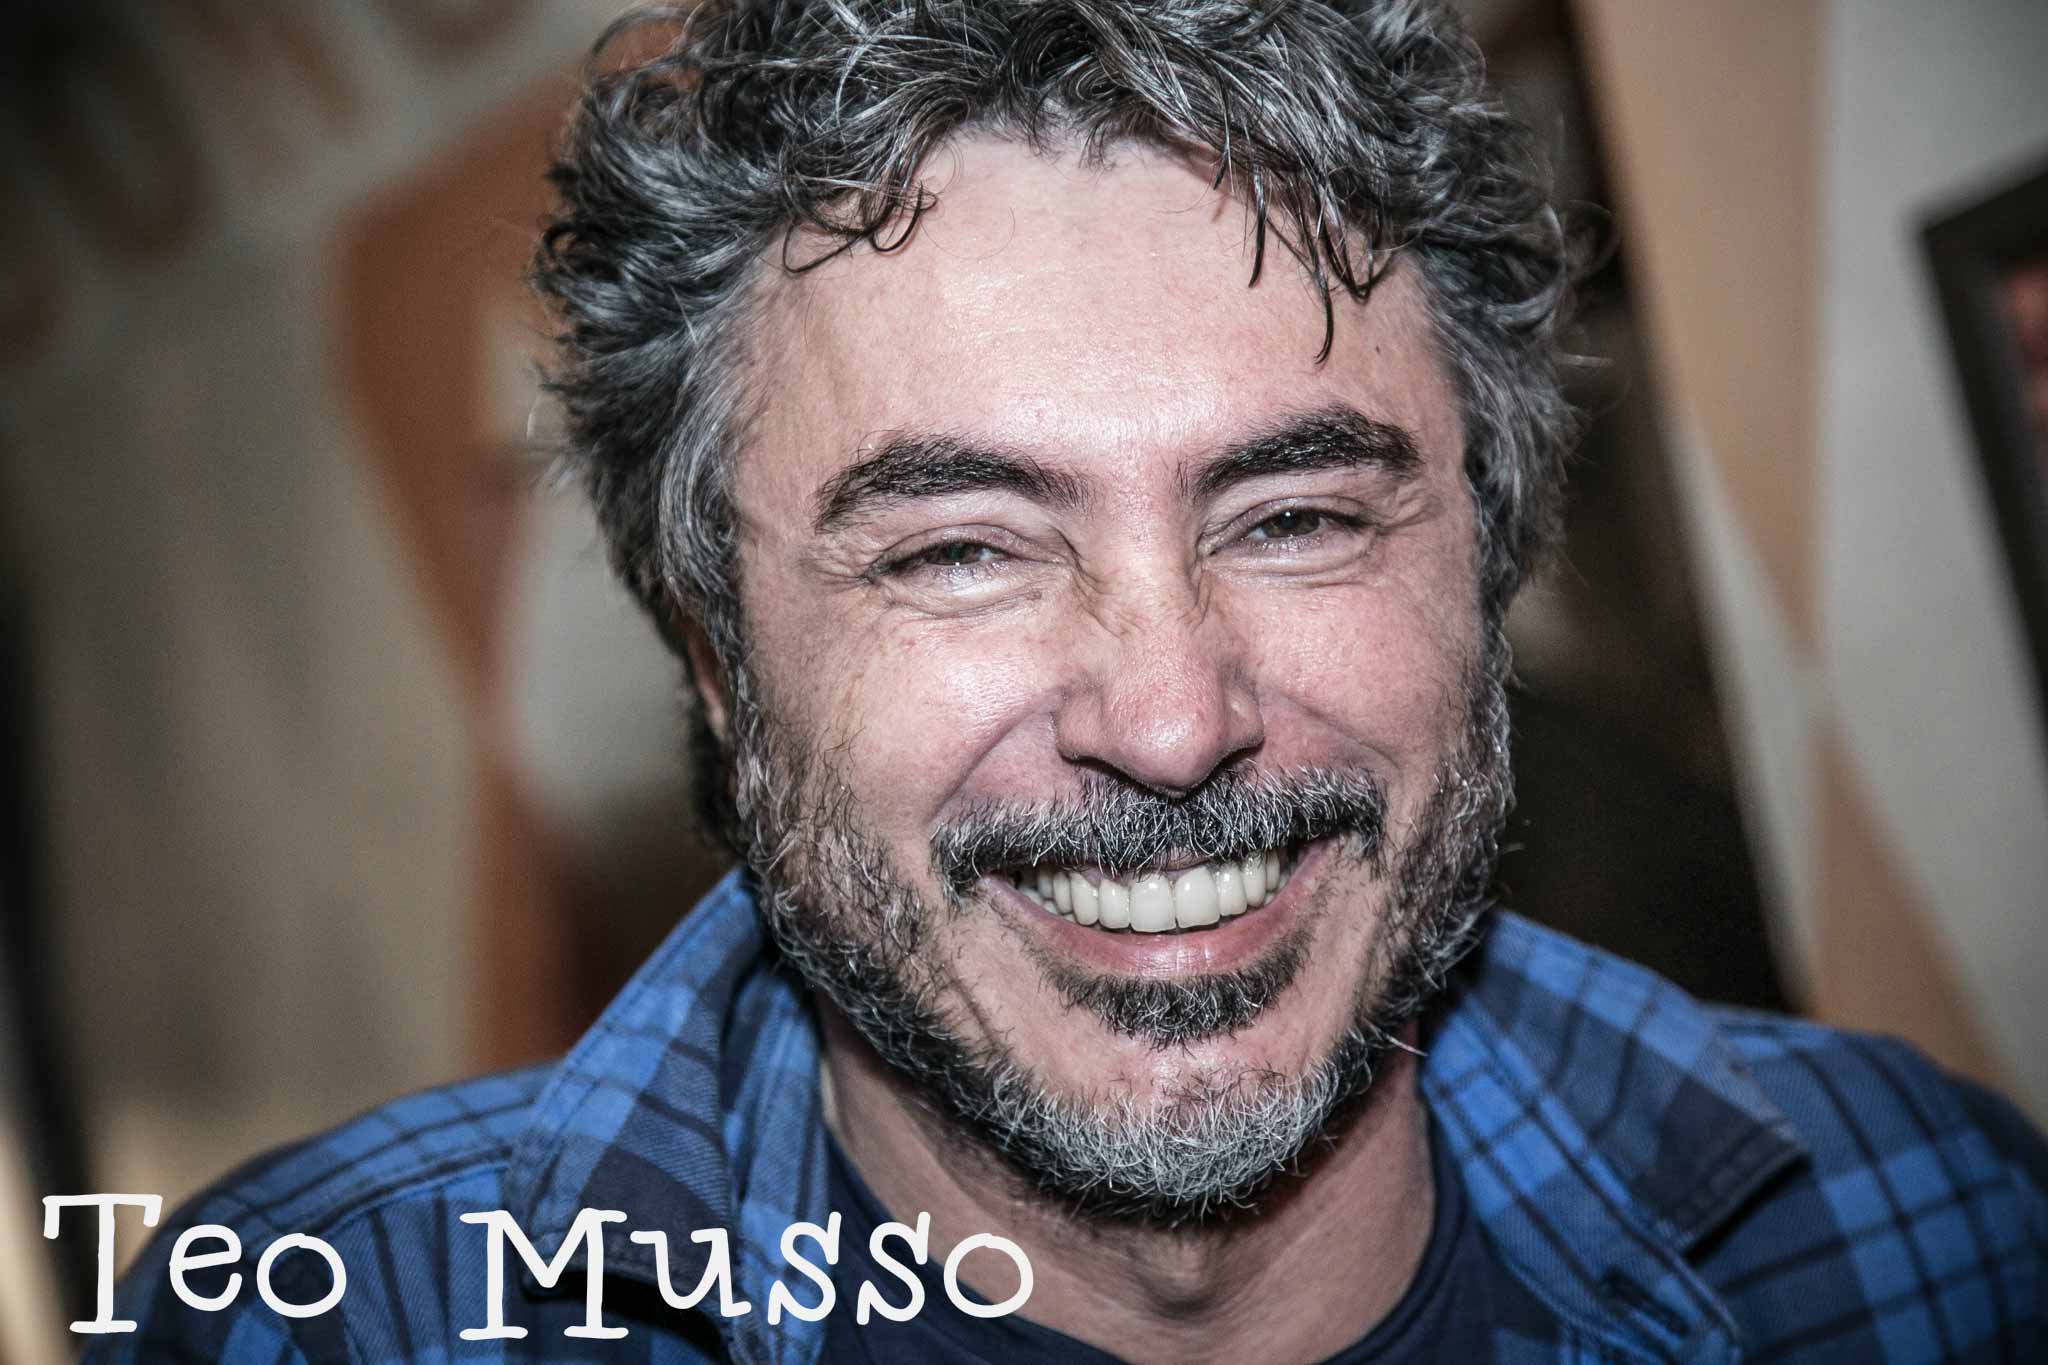 Teo Musso